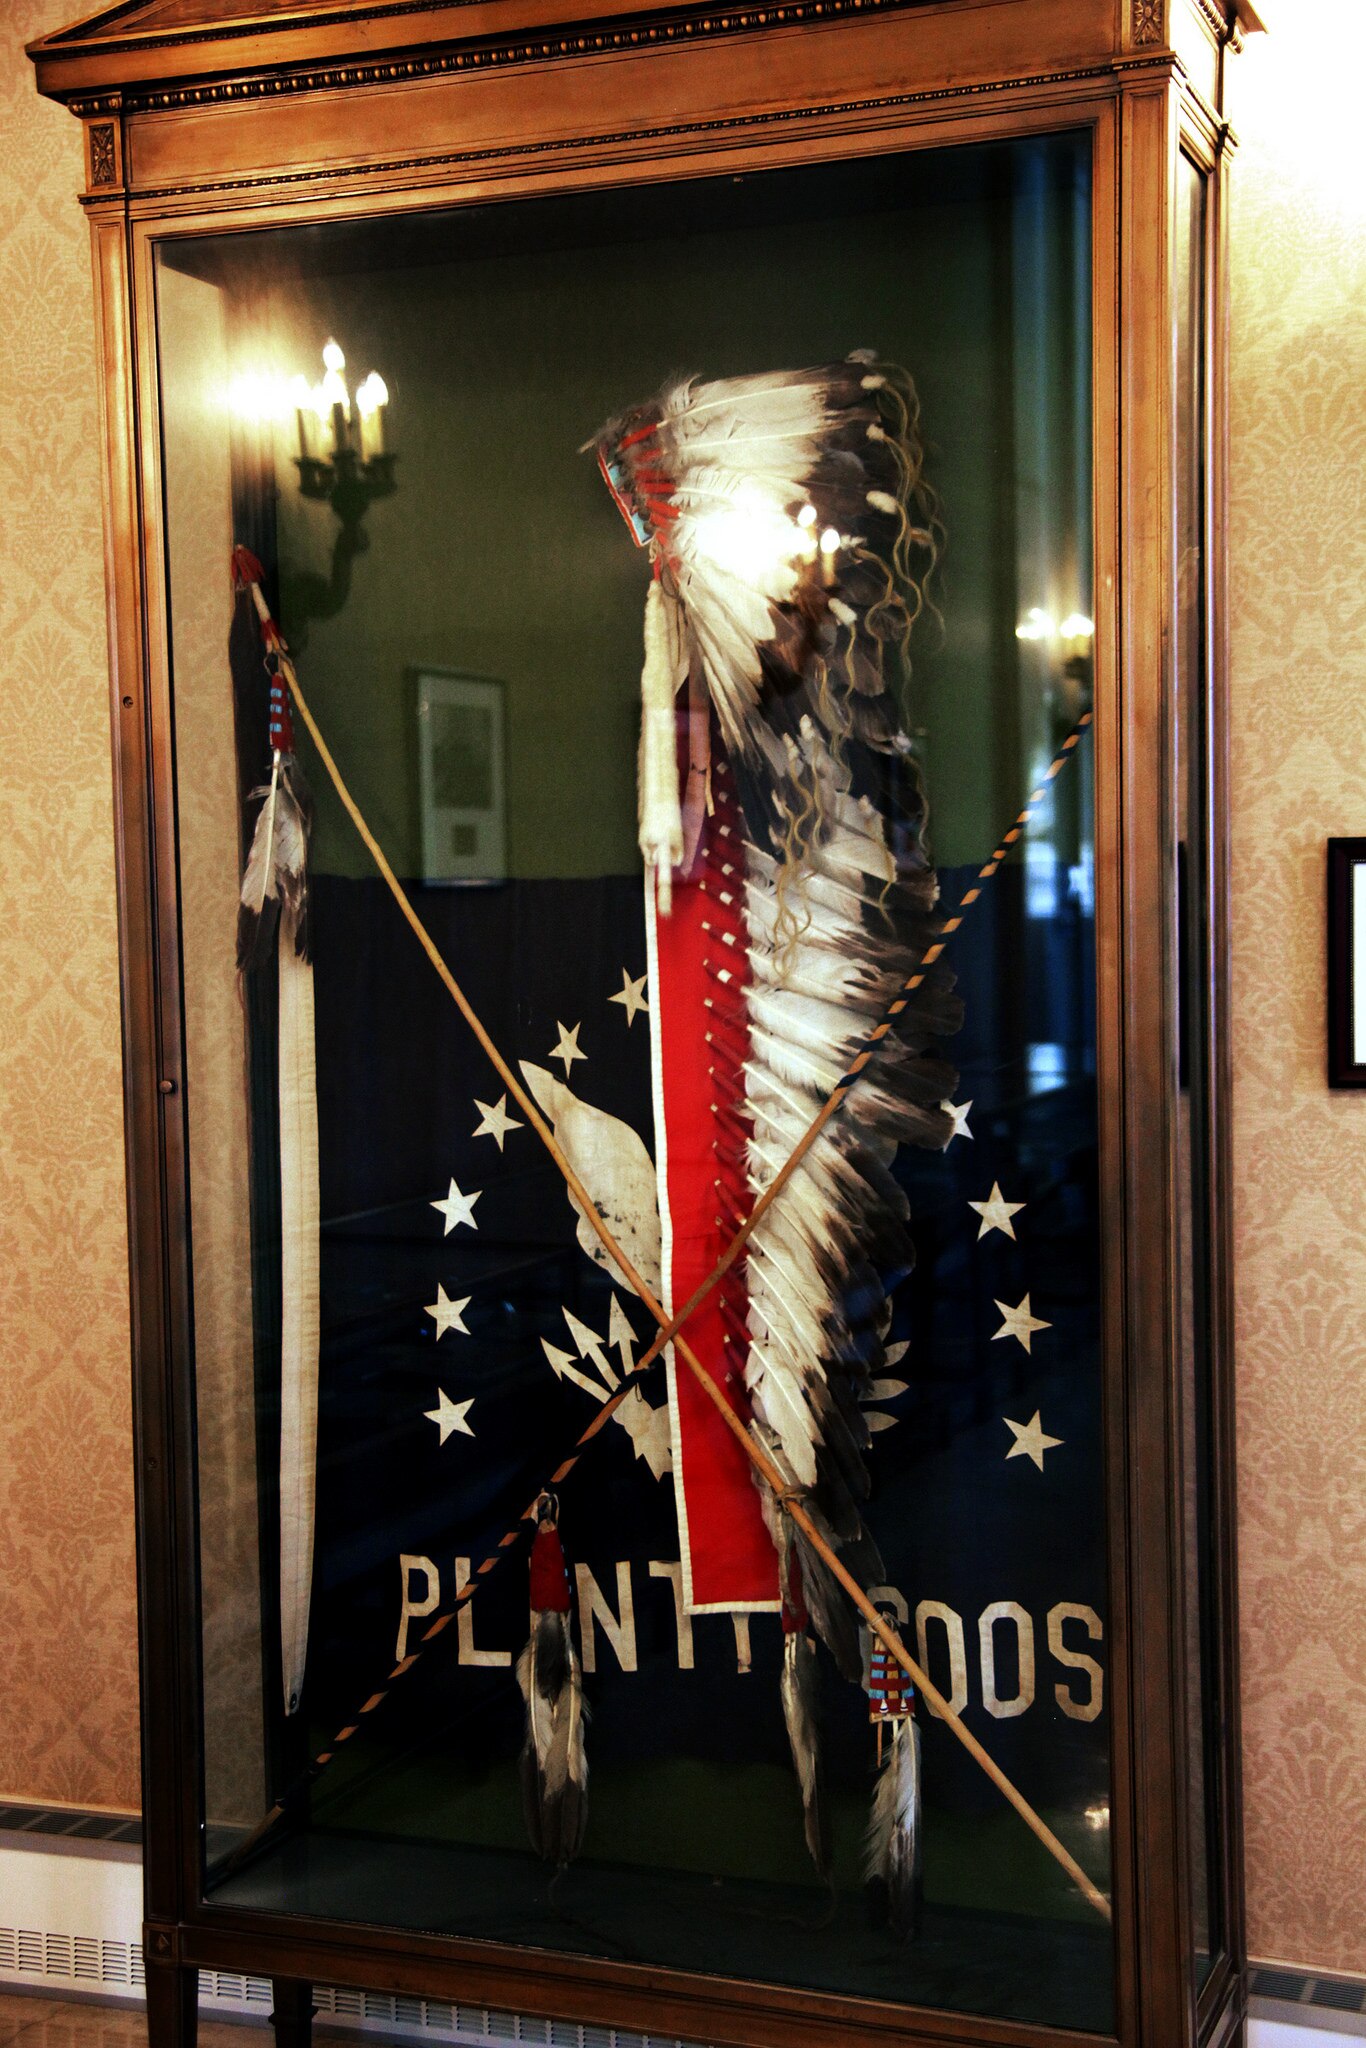 A feathered headdress and ceremonial stick in a glass cabinet